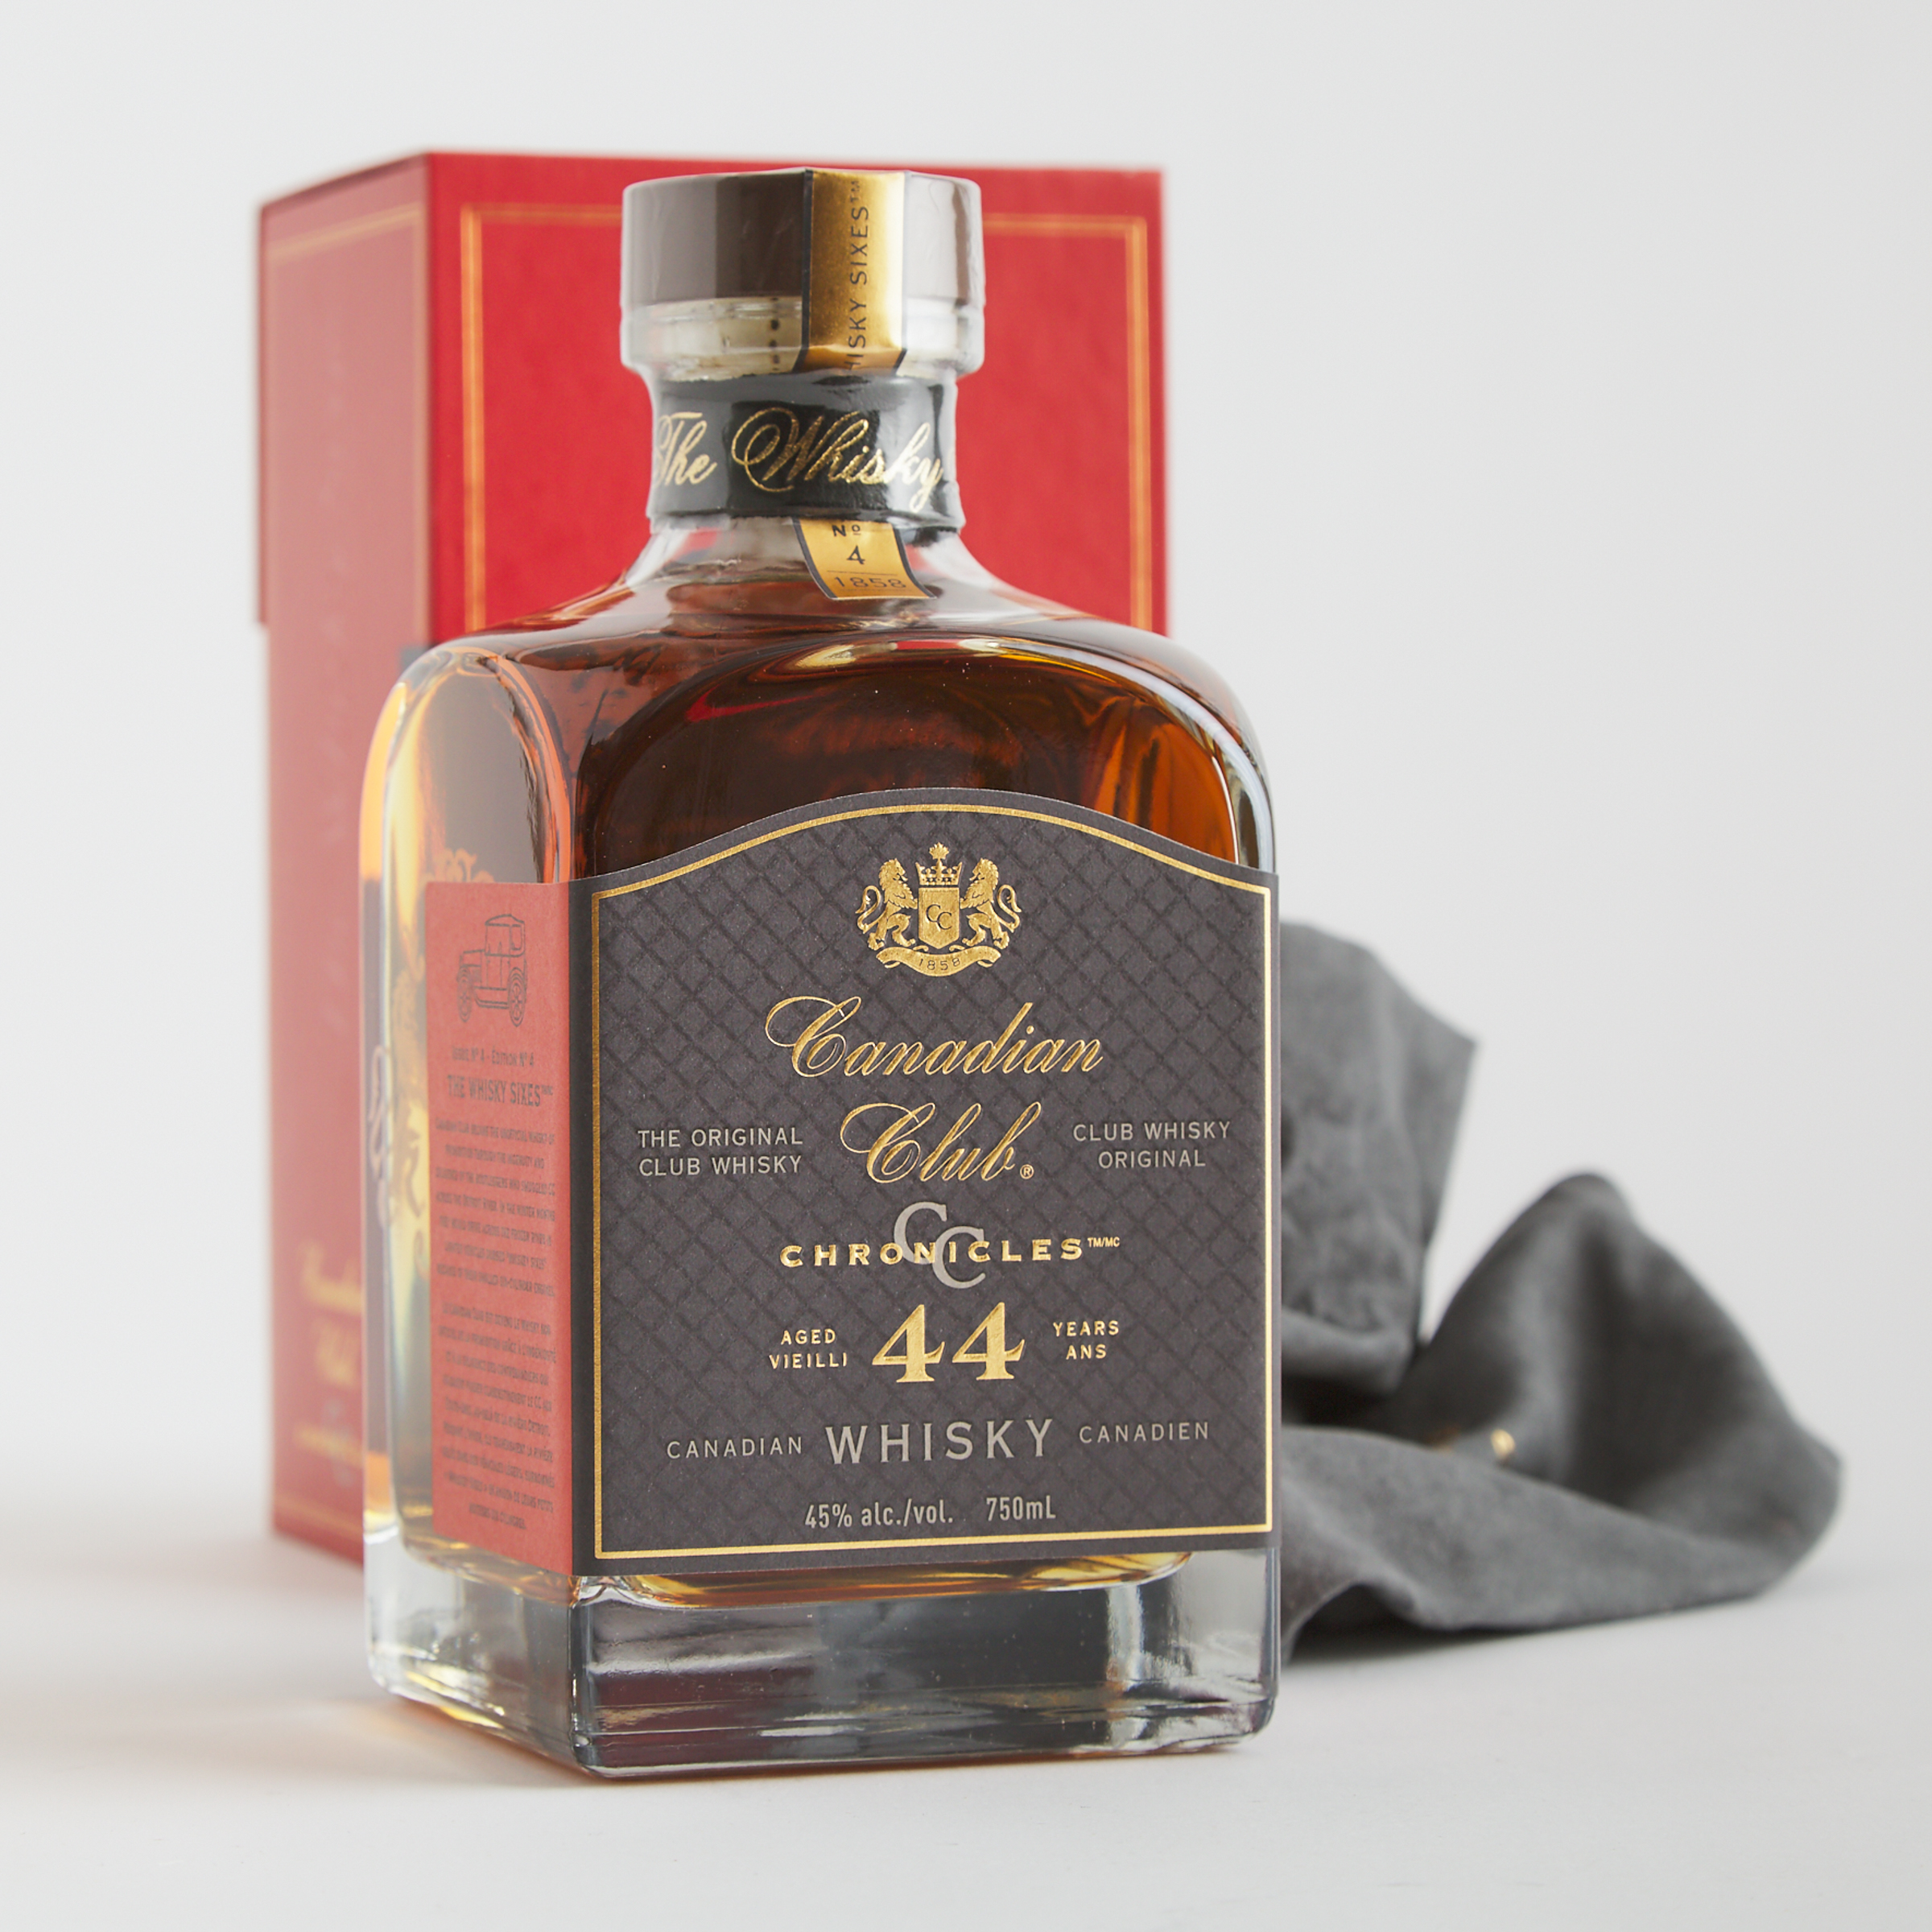 CANADIAN CLUB CANADIAN WHISKY 44 YEARS (ONE 750 ML)